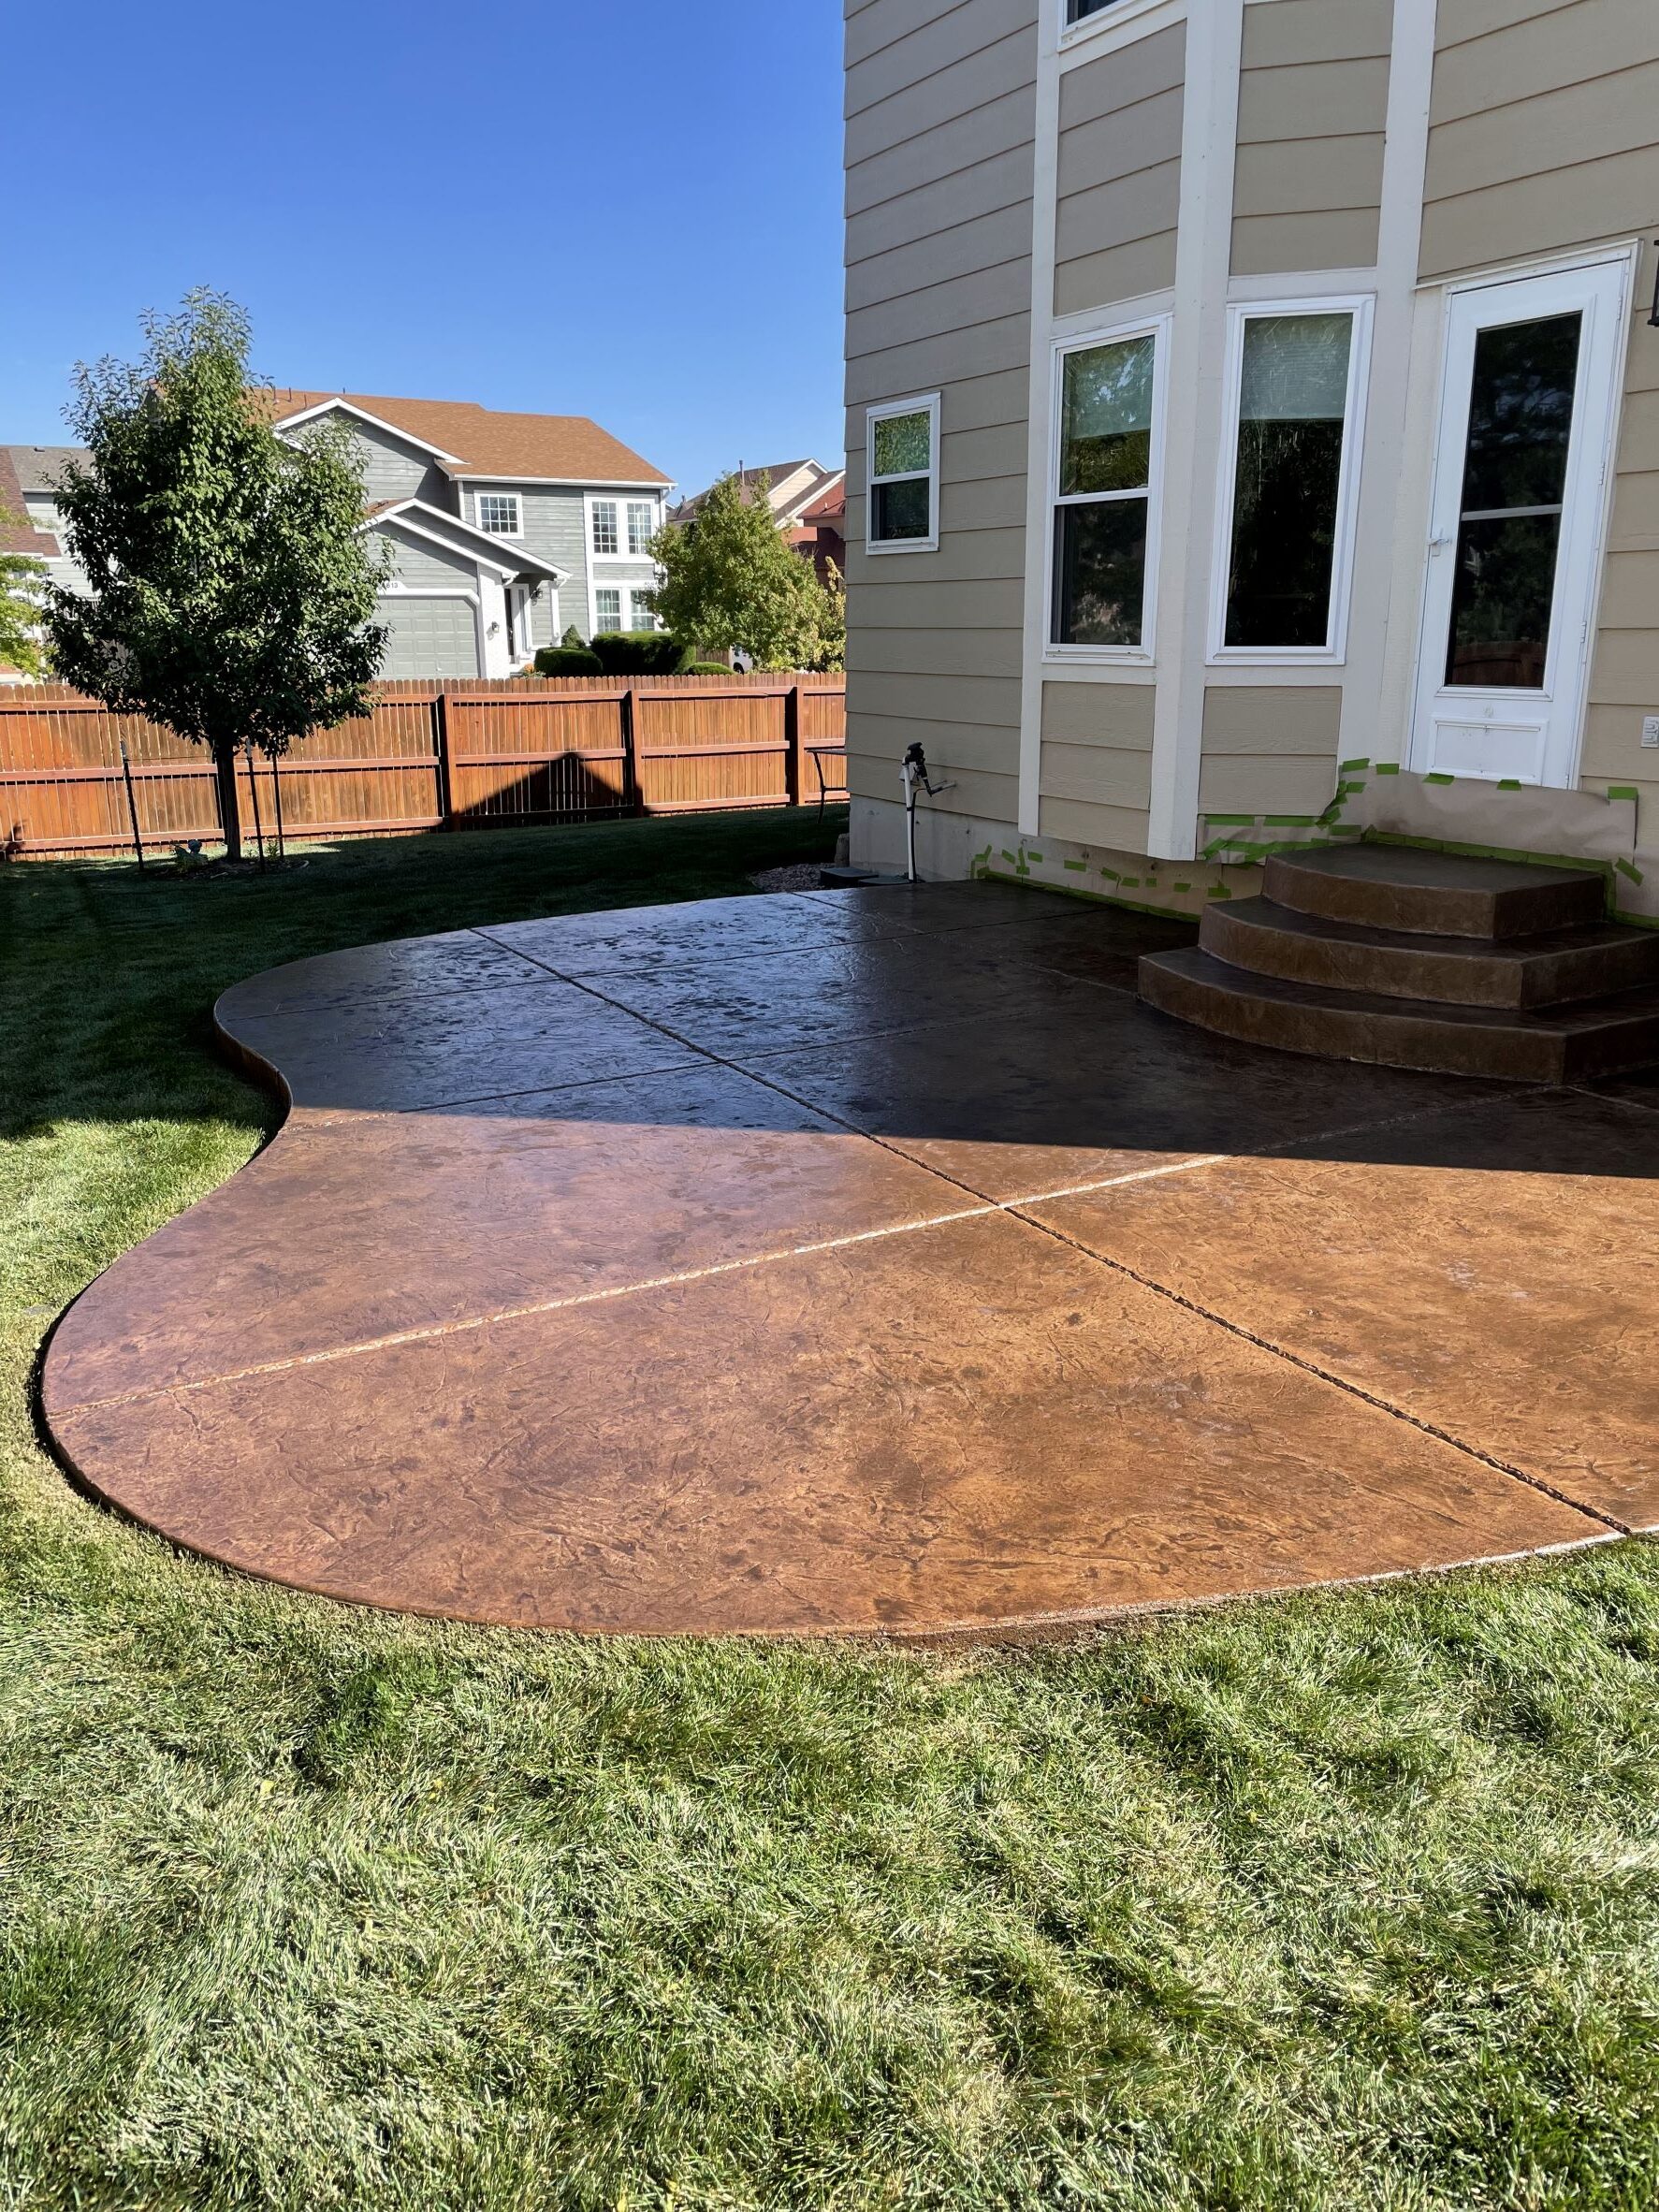 Brown Stained Stamped Concrete Patio - Driftwood Antiquing Stain